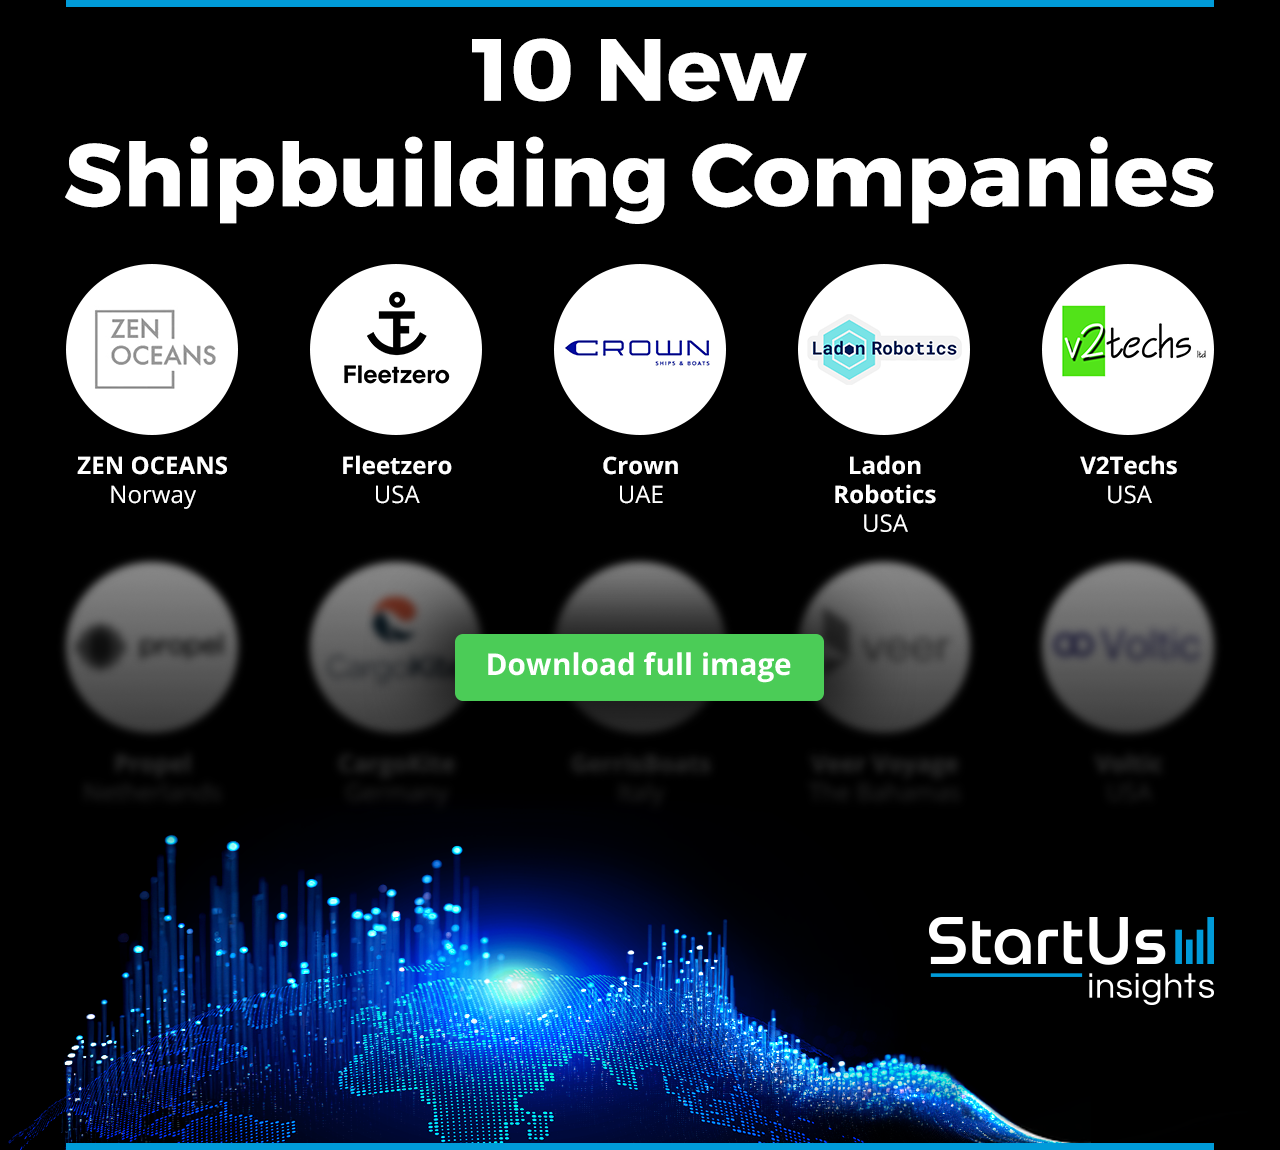 New-Shipbuilding-Companies-Logos-Blurred-StartUs-Insights-noresize